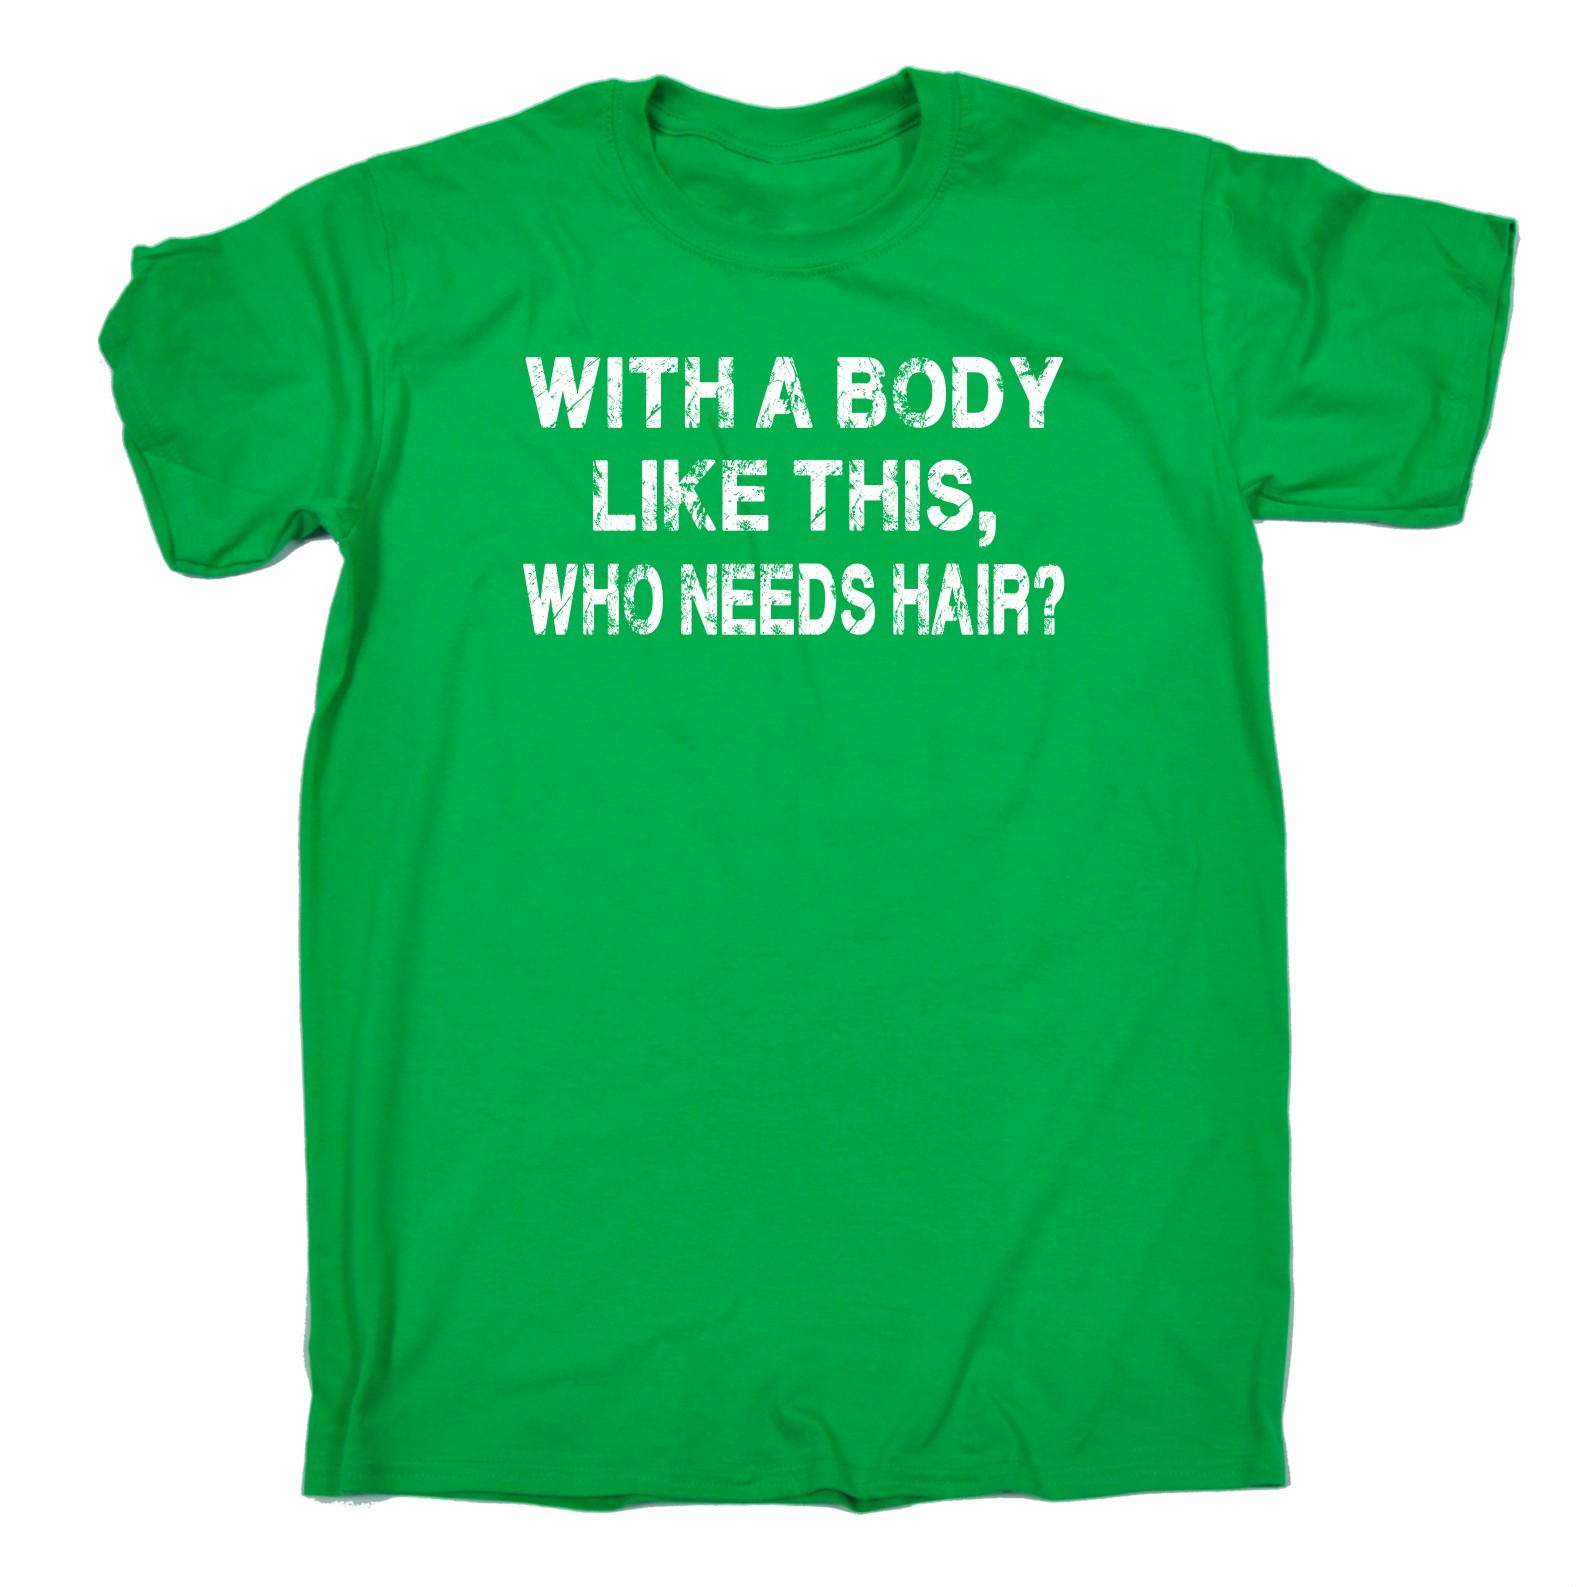 thumbnail 4 - Men&#039;s With A Body Like This Who Needs Hair Funny Joke Humour T-SHIRT Birthday